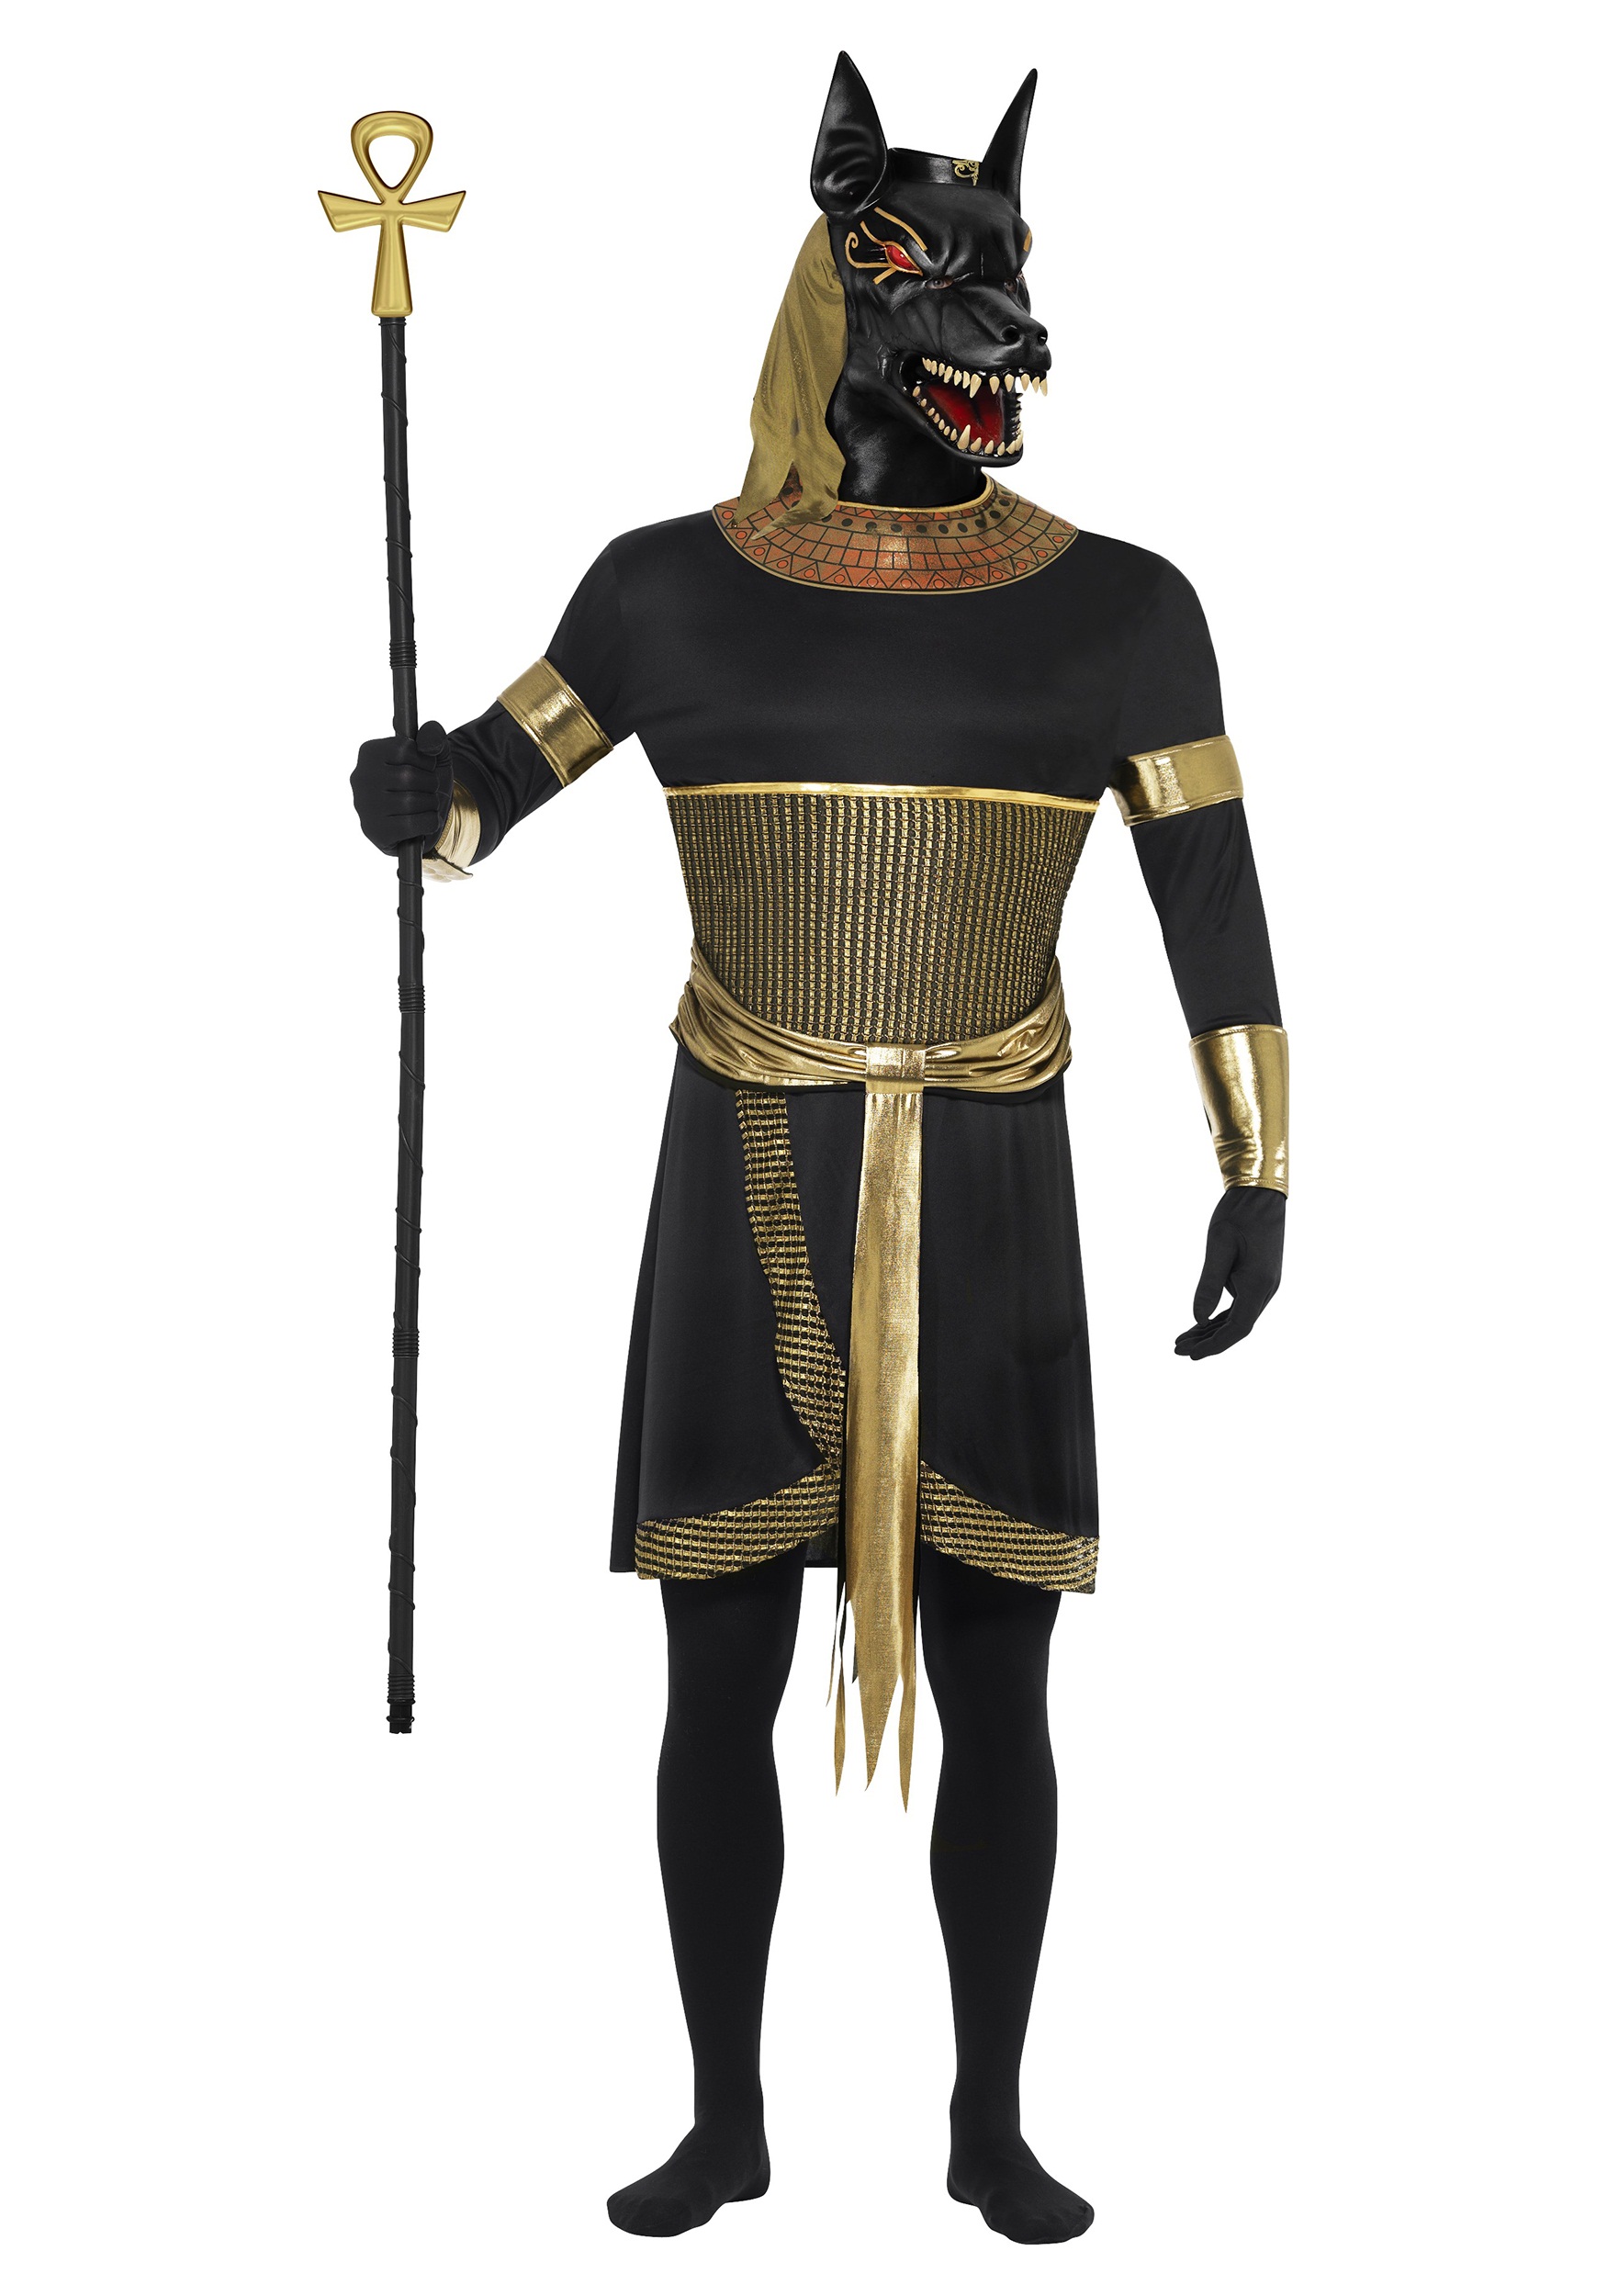 Image of Smiffys Men's Anubis the Jackal Costume For Adults